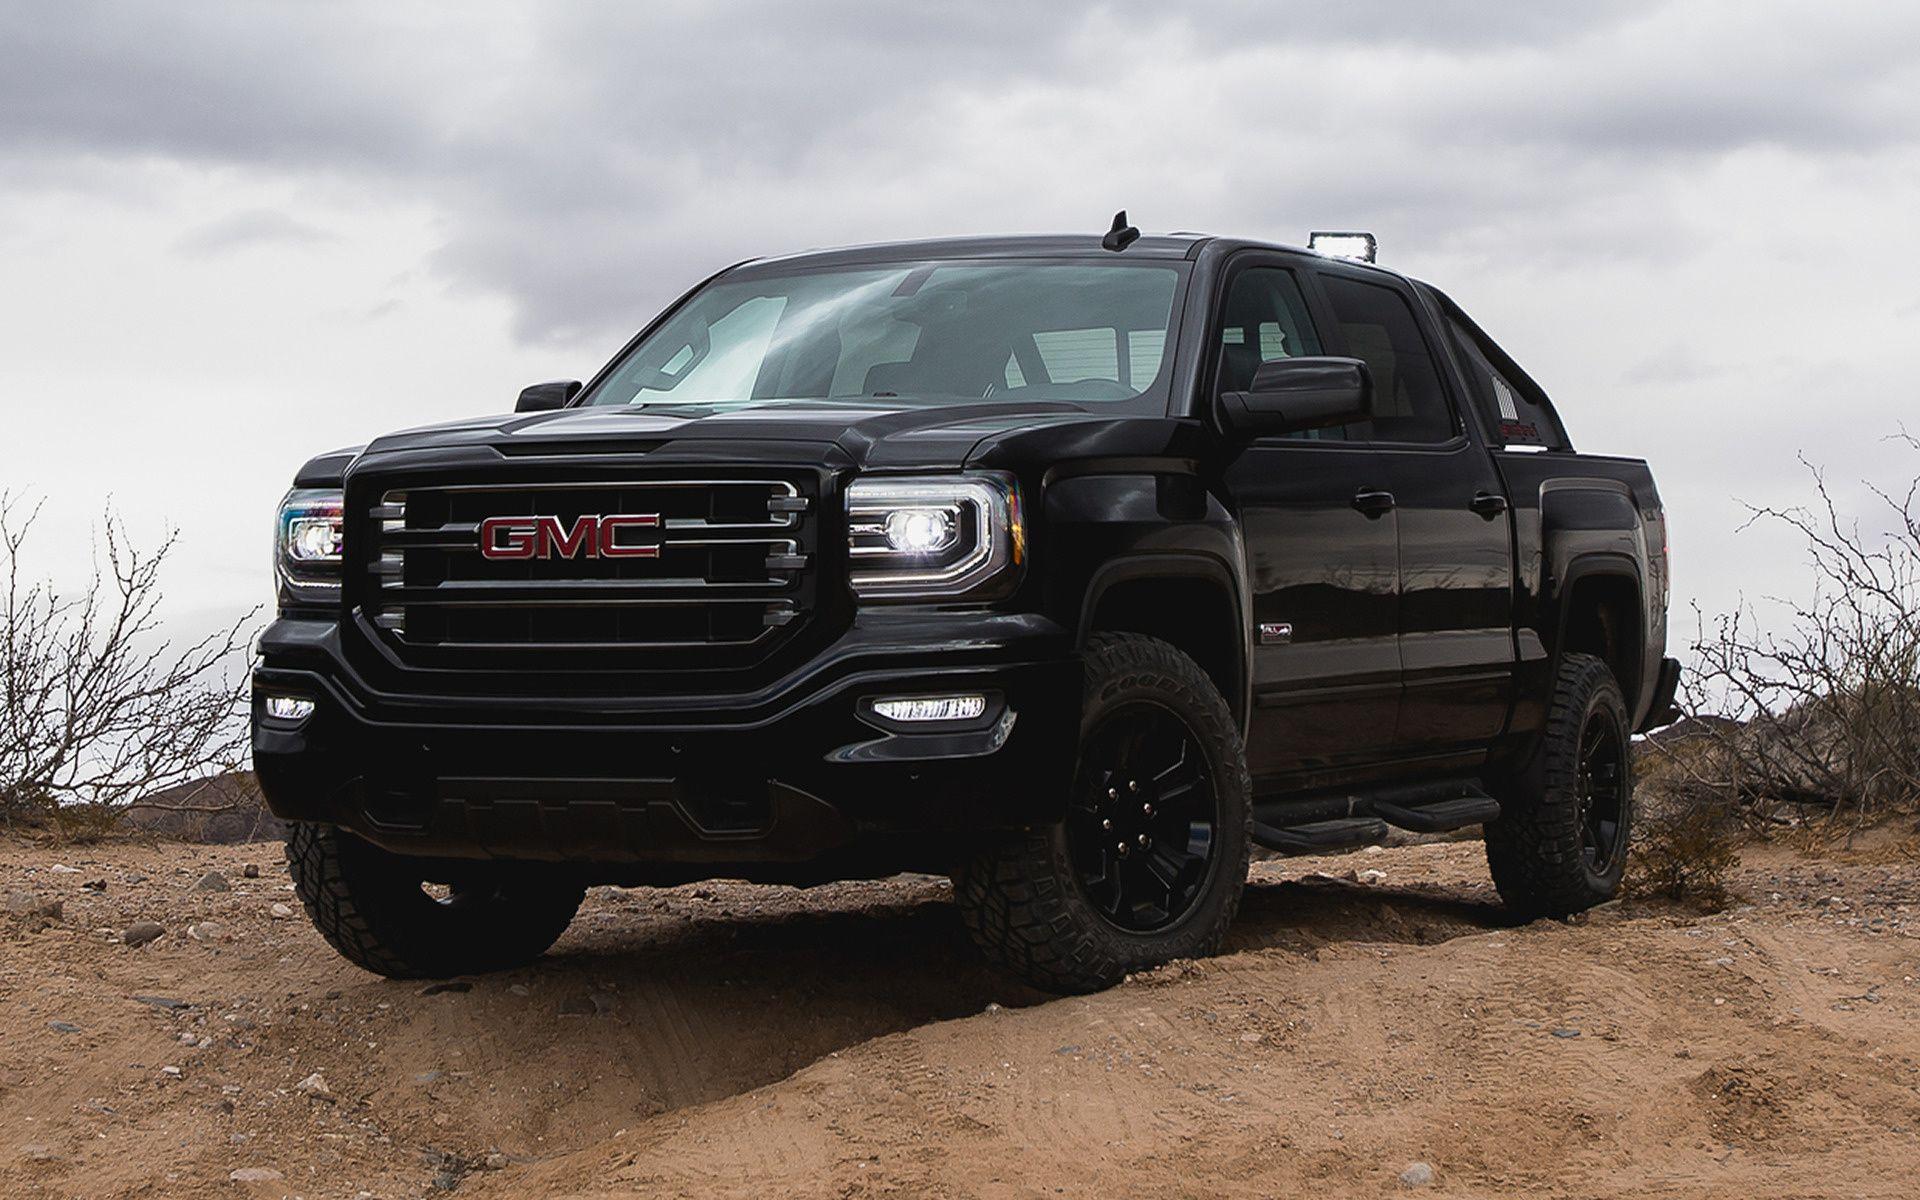 GMC Sierra Wallpapers and Backgrounds Wallpaper